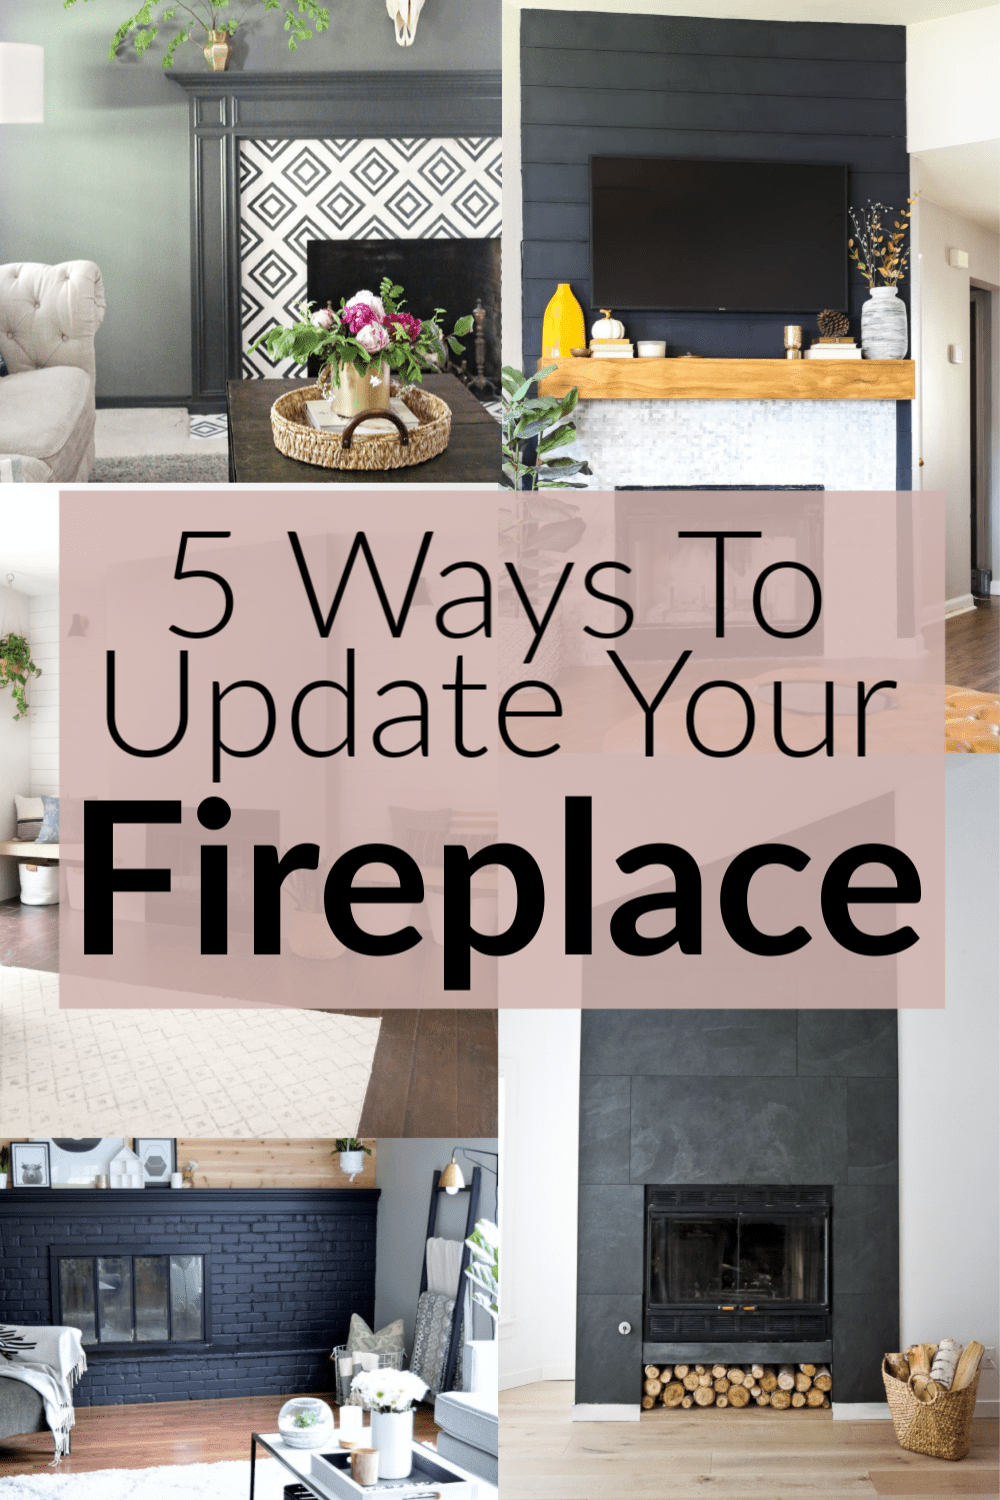 Tips for New Fireplace Owners